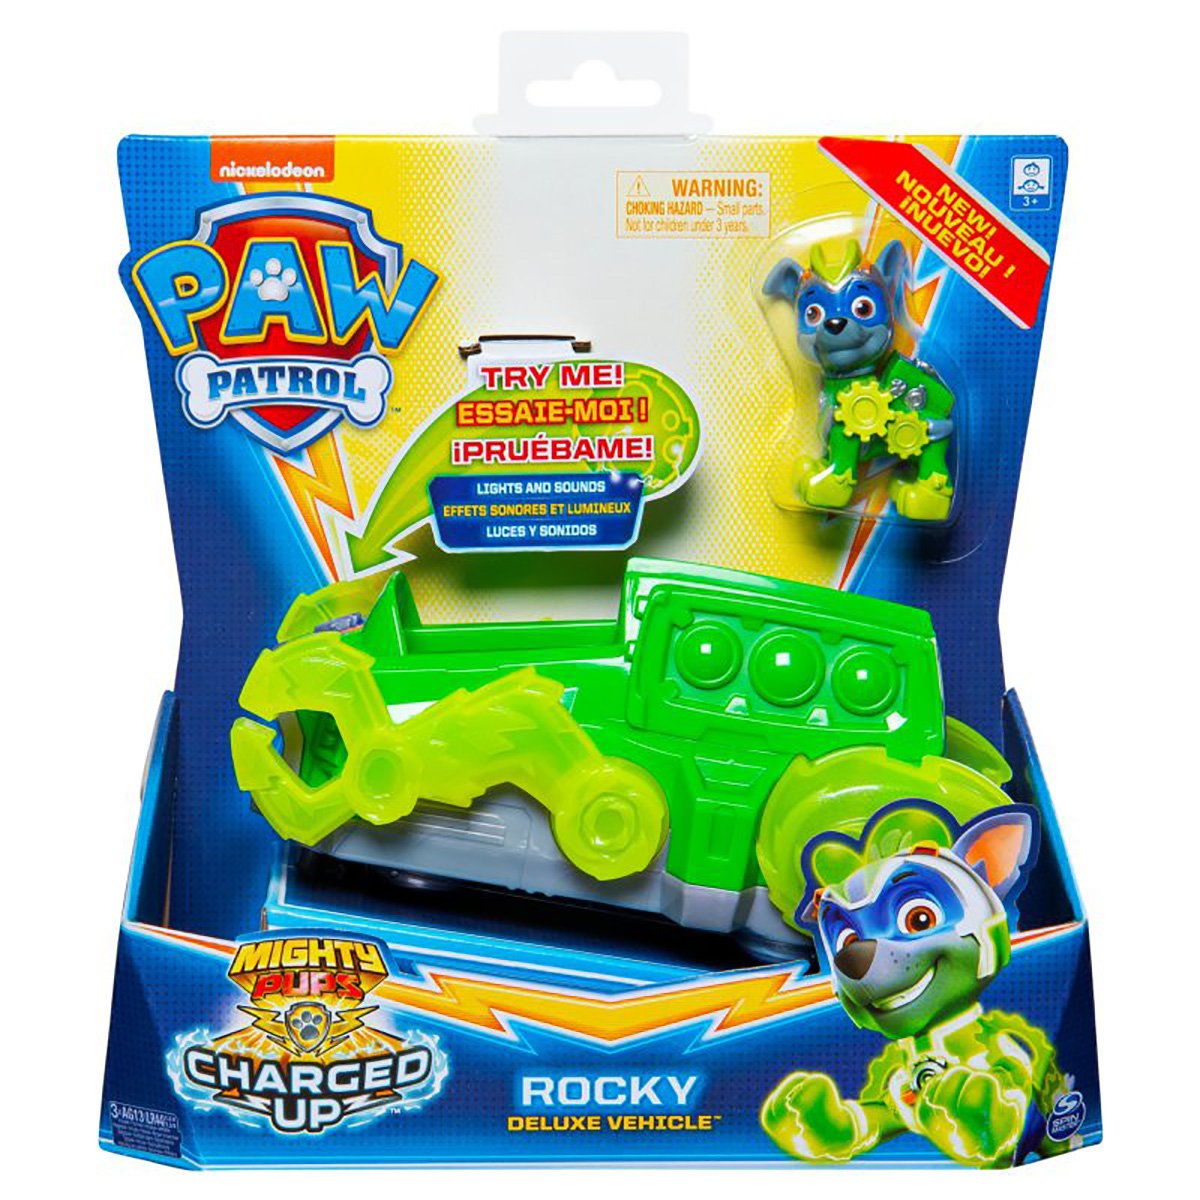 Figurina cu vehicul Paw Patrol Deluxe Vehicle Mighty Pups, Rocky 20121276